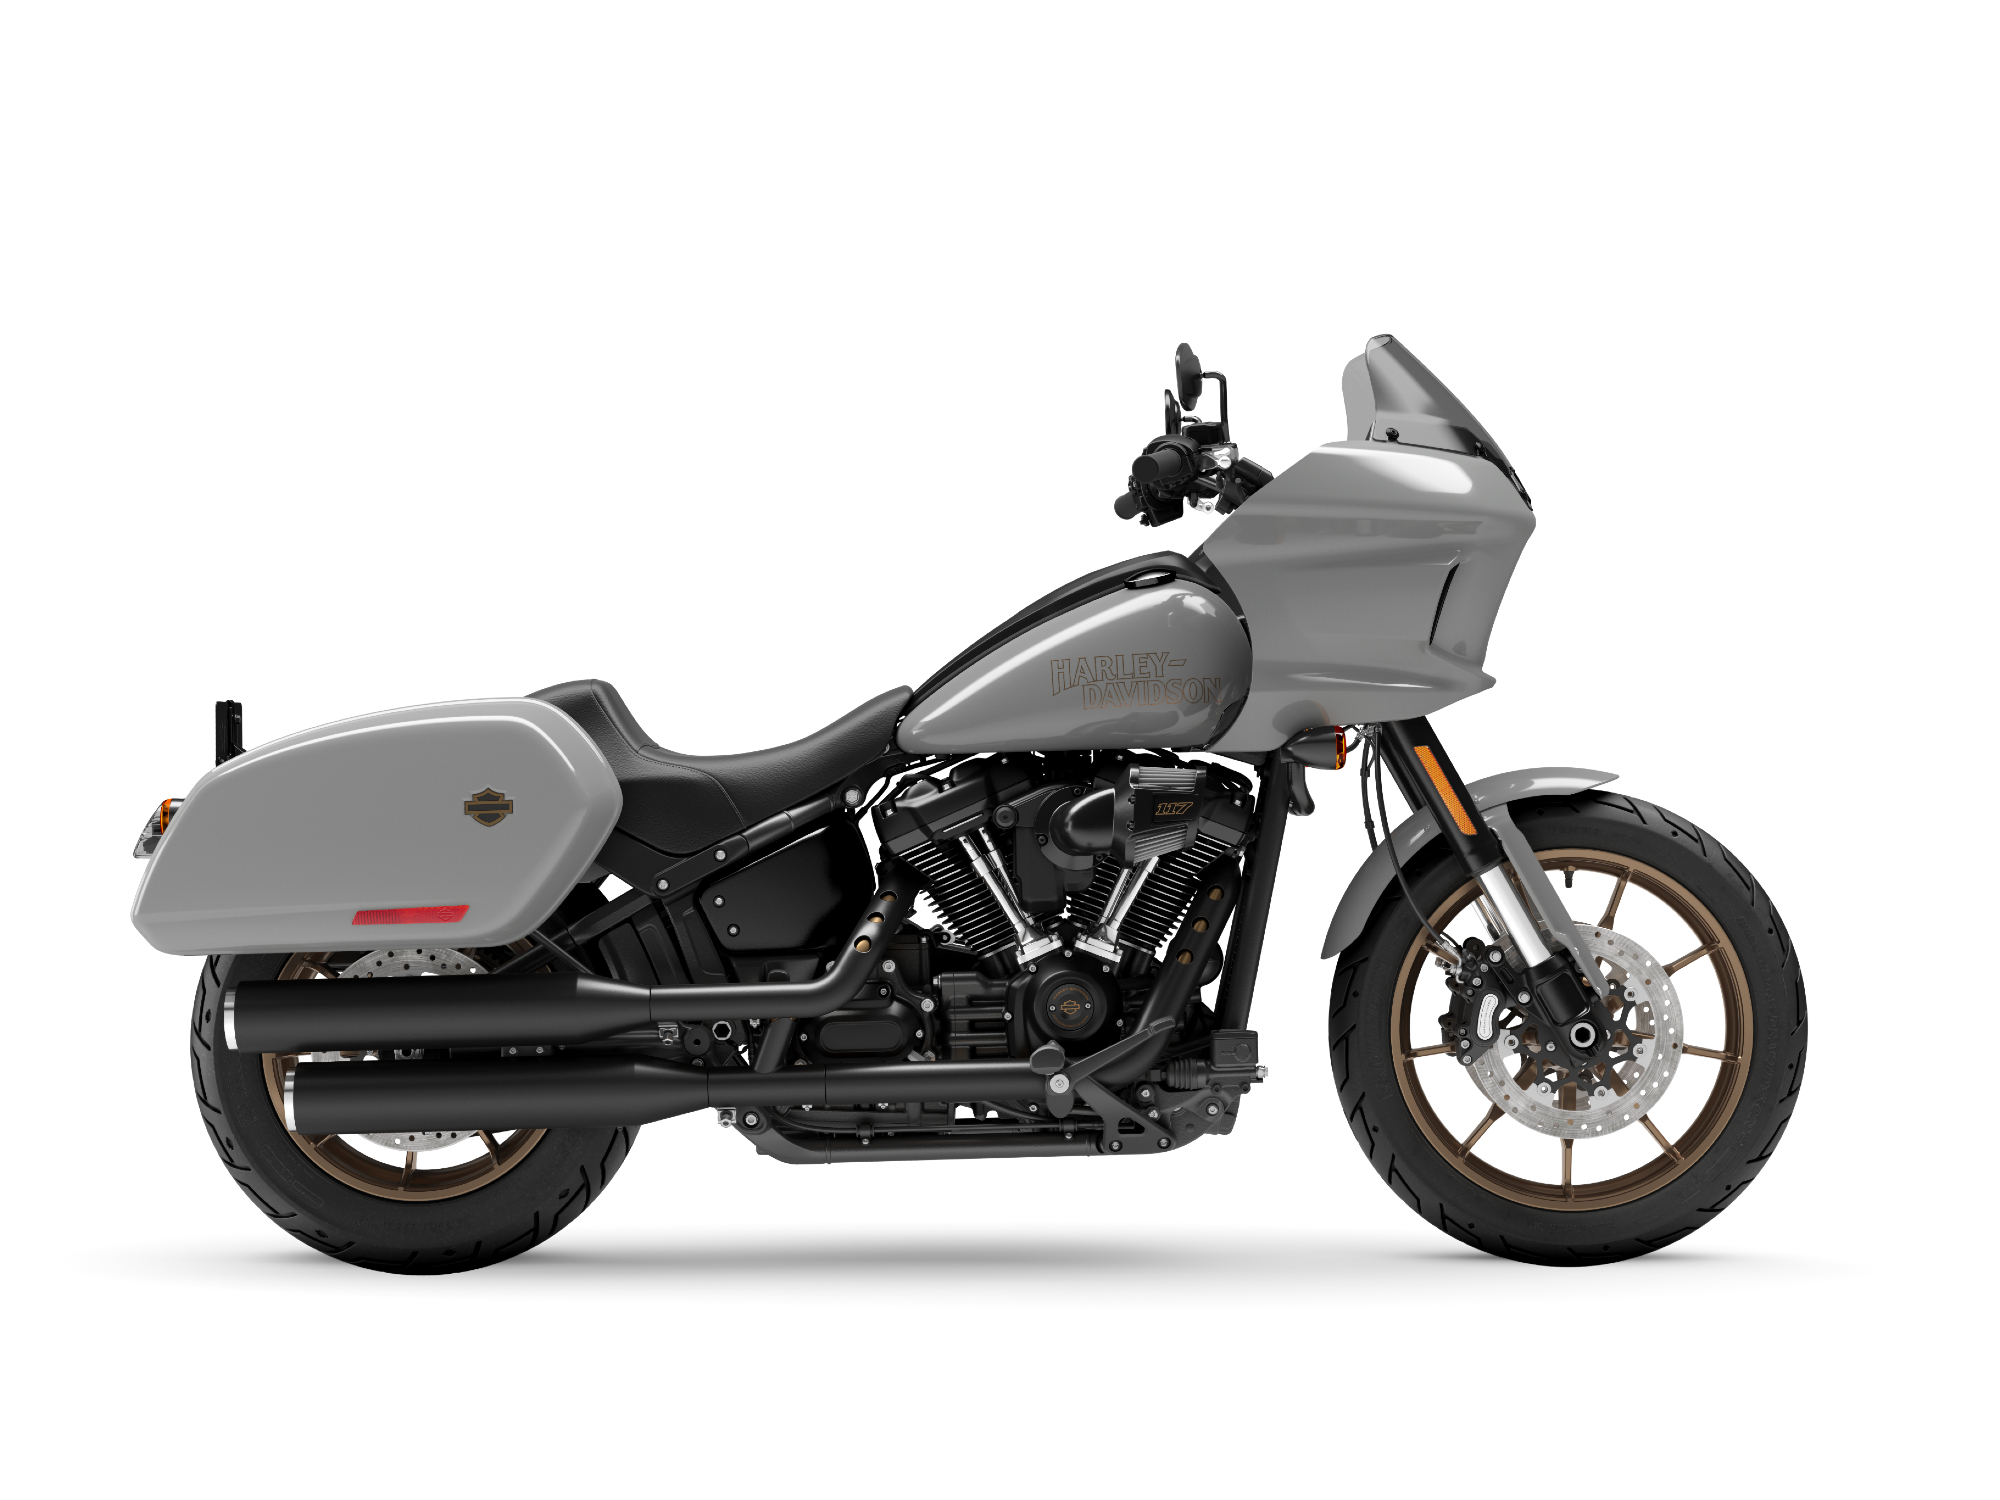 2024 Harley-Davidson Low Rider ST product shot in Billiard Gray color.